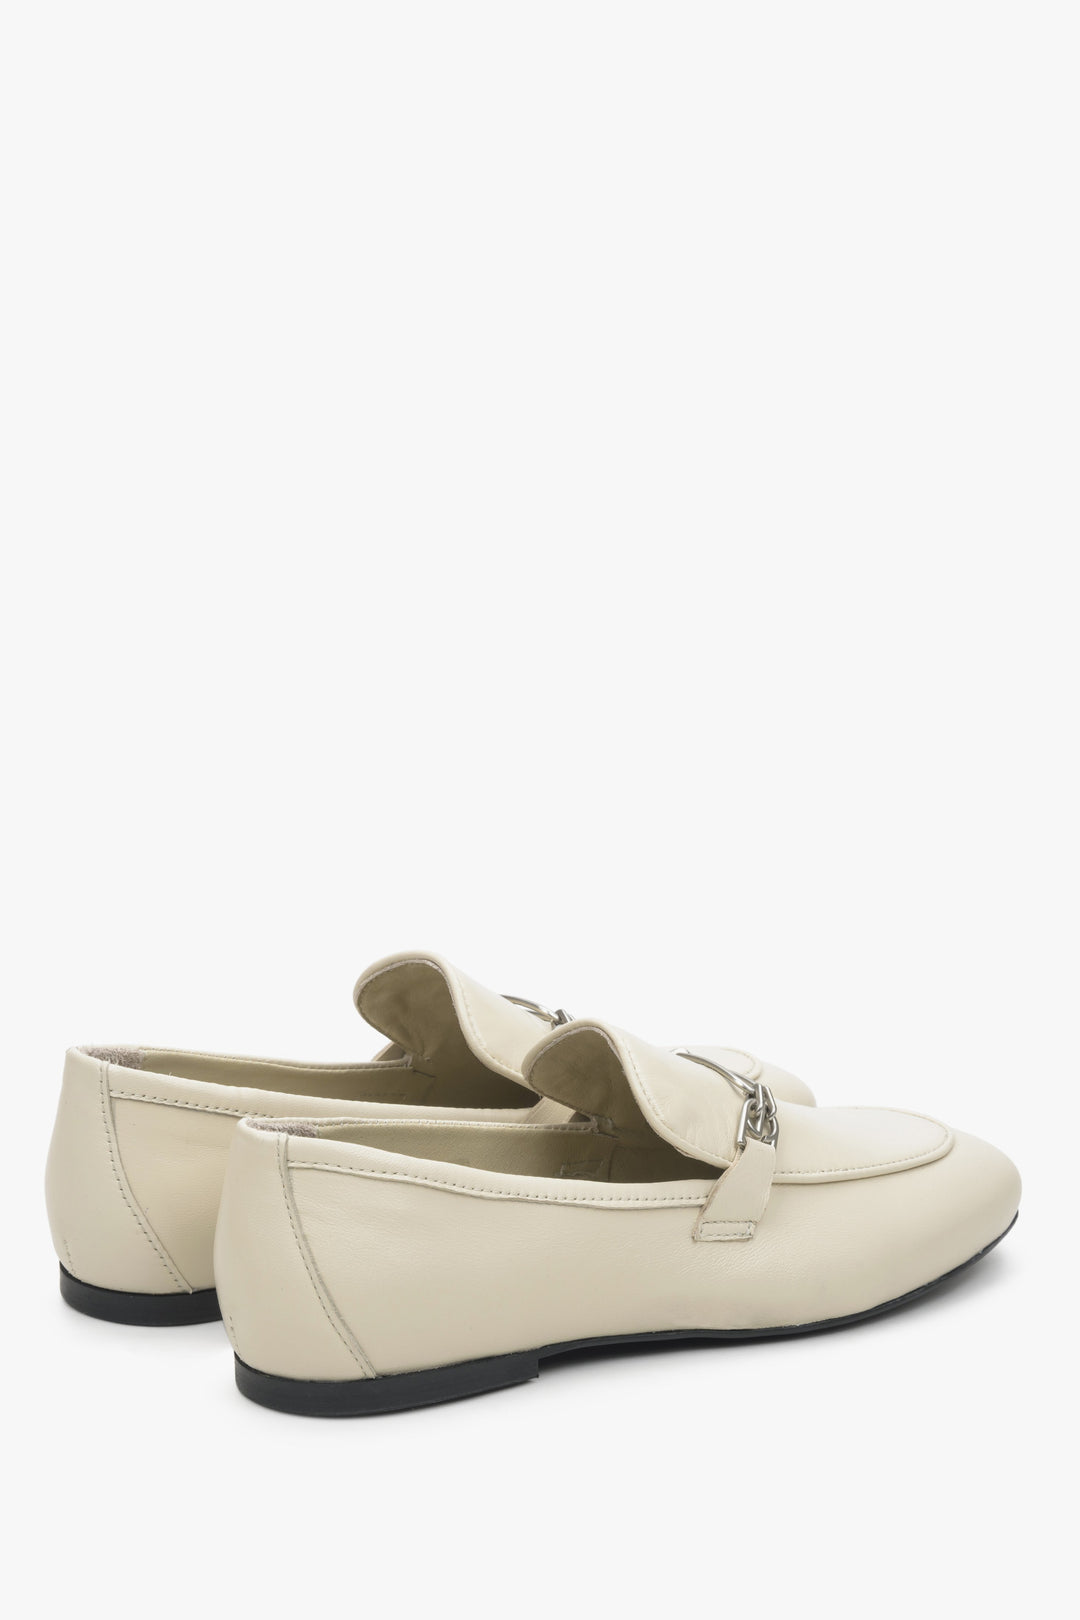 Women's light beige loafers Estro - a close-up on heel coubter and shoe's sideline